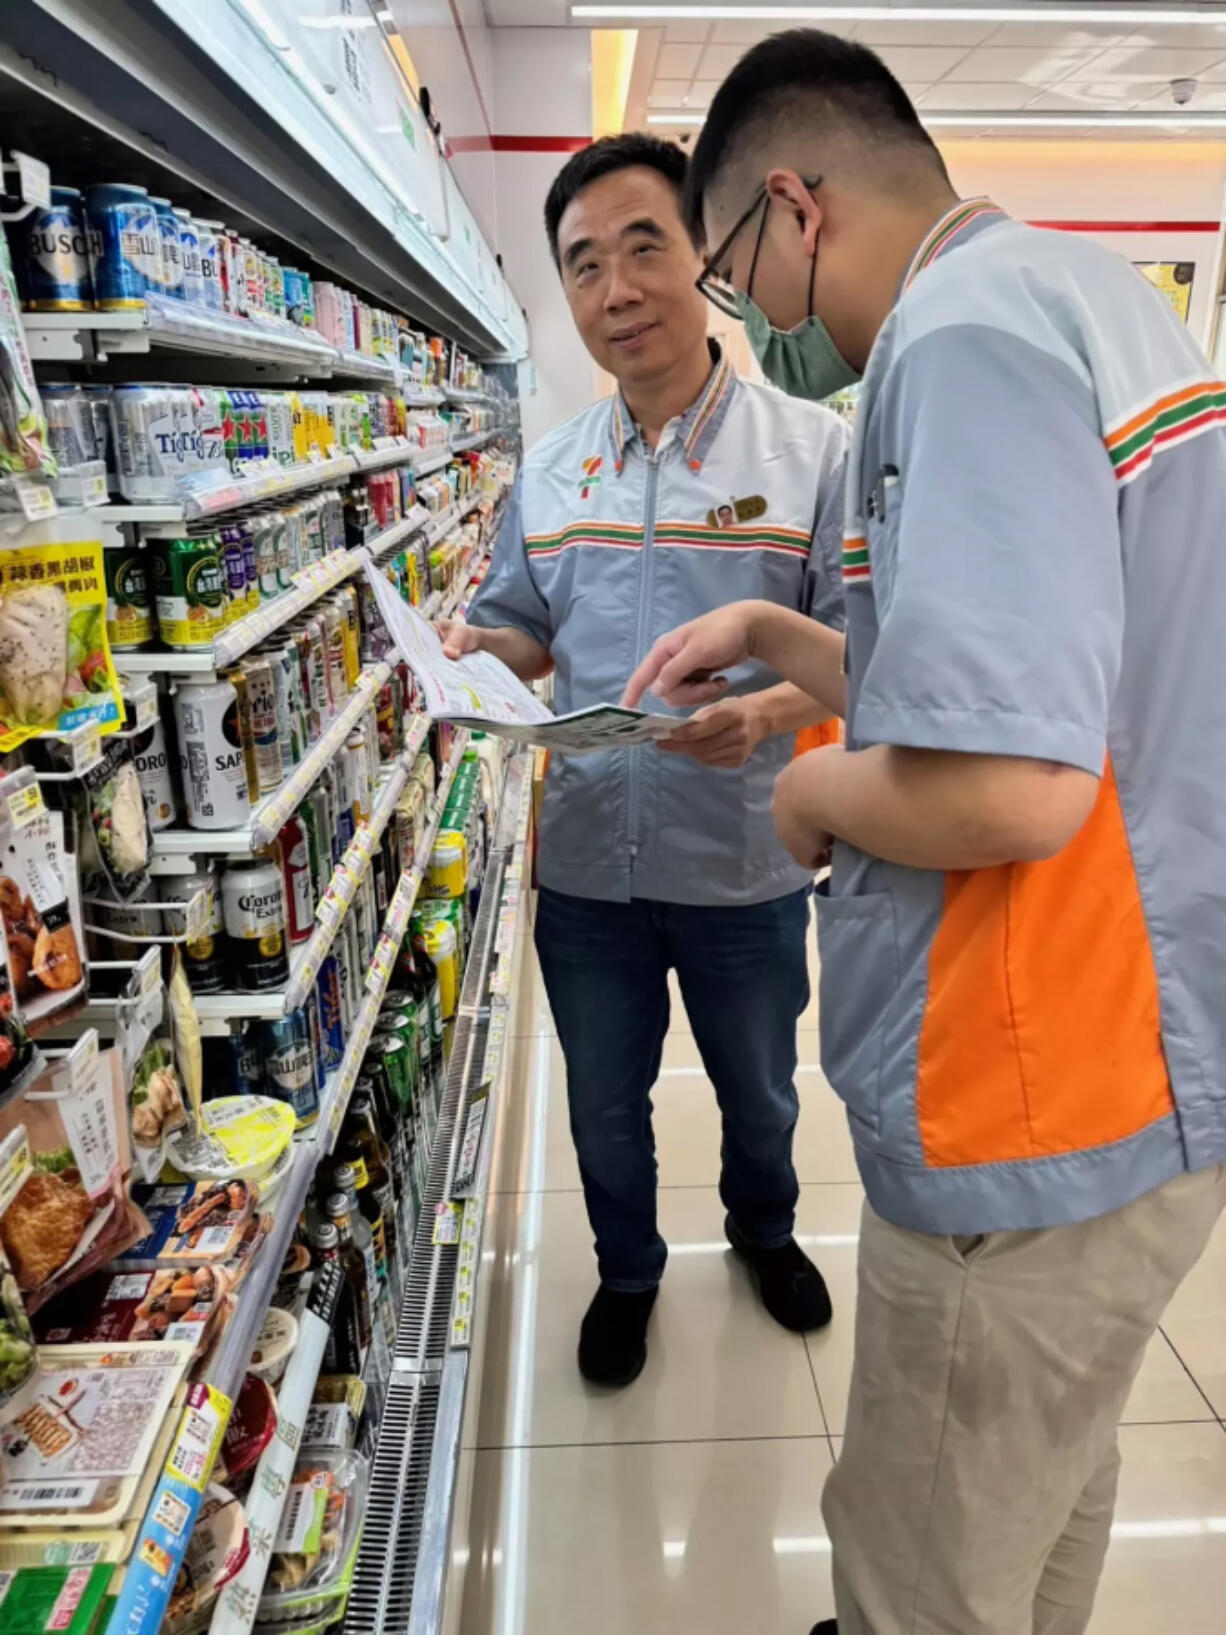 Frank Shyong&rsquo;s uncle at work at 7-Eleven in Taichung, Taiwan. 7-Eleven in Taiwan has evolved beyond the original American convenience store model to dominate life in Taiwan.